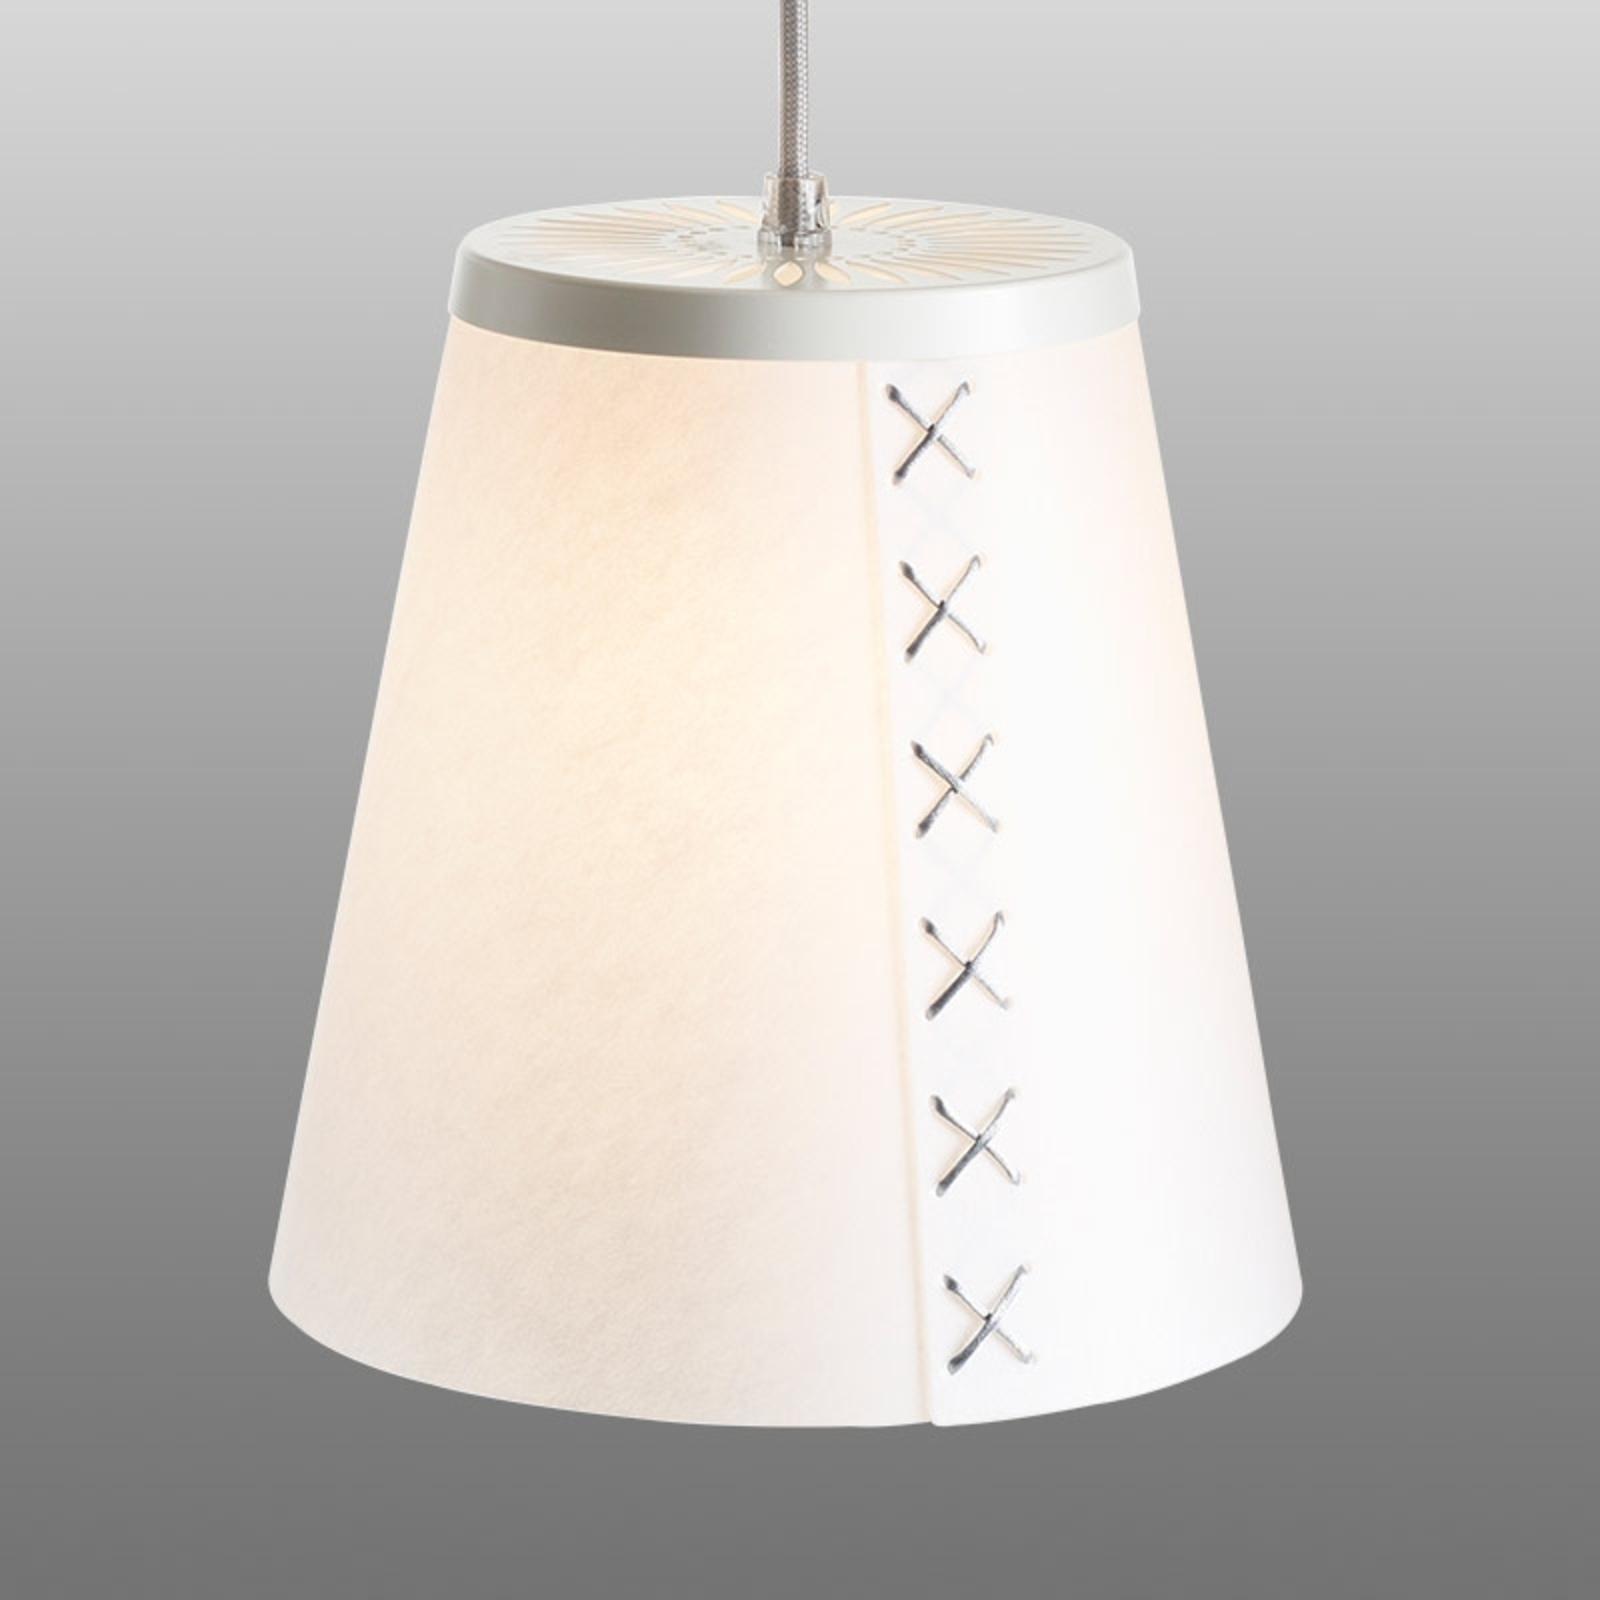 Flör pendant light made of lunopal, silver cable